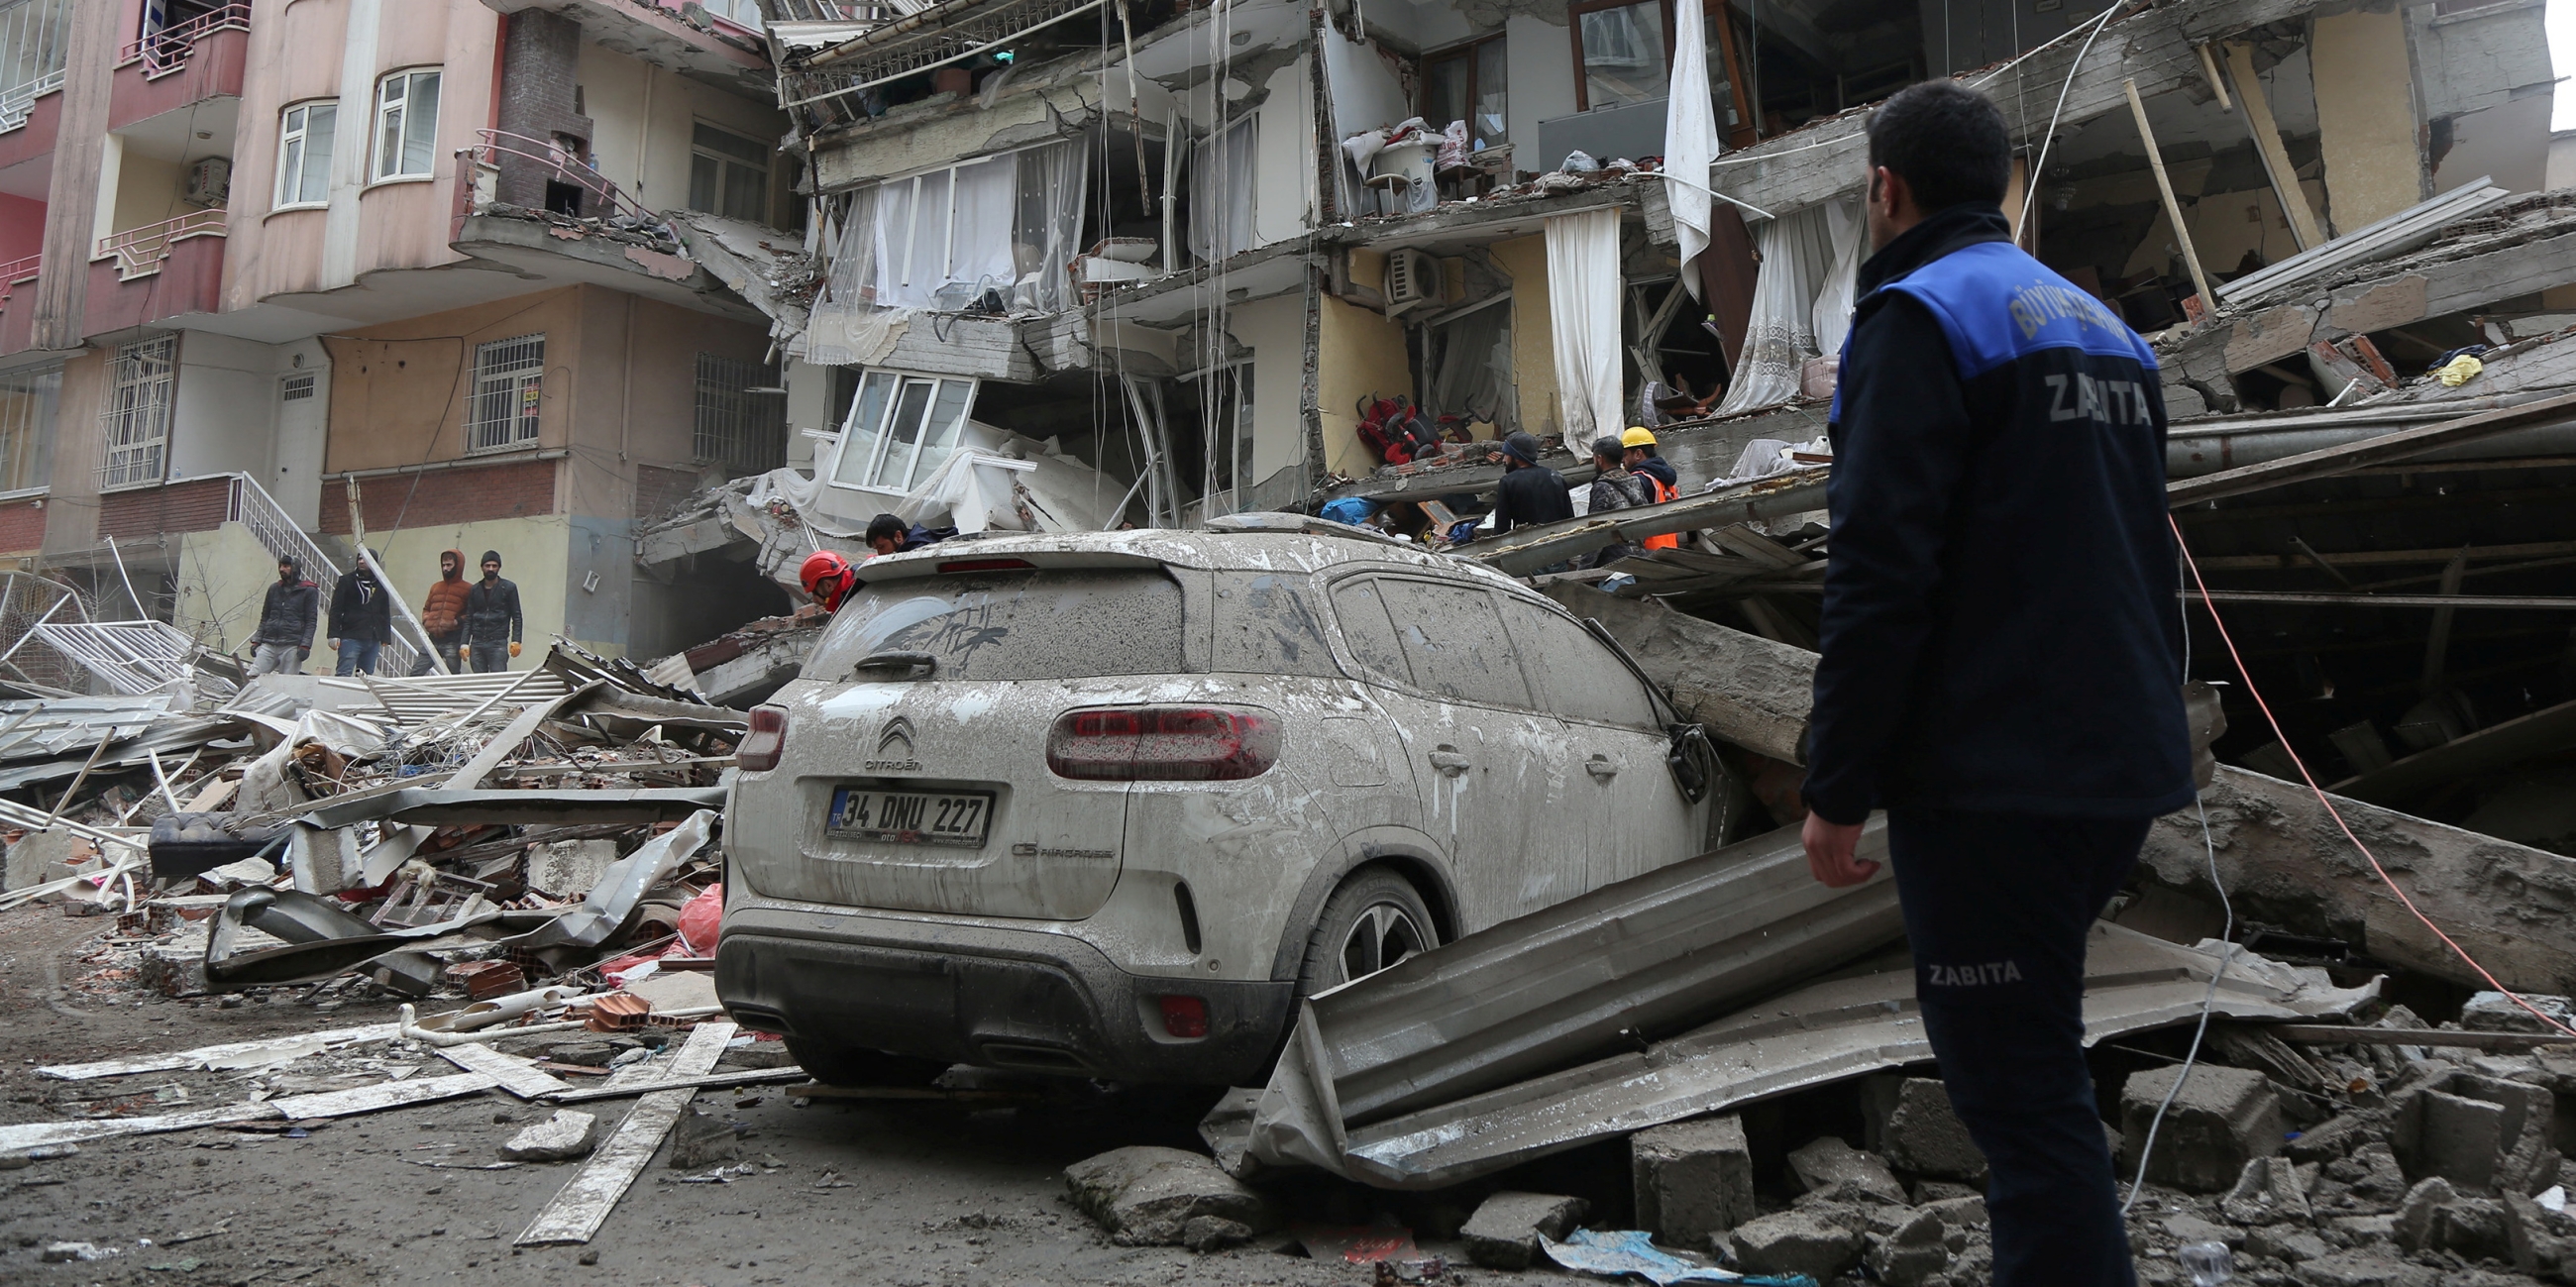 Rescuers search for survivors at a damaged building following an earthquake in Diyarbakir, Turkey on 6 February 2023.